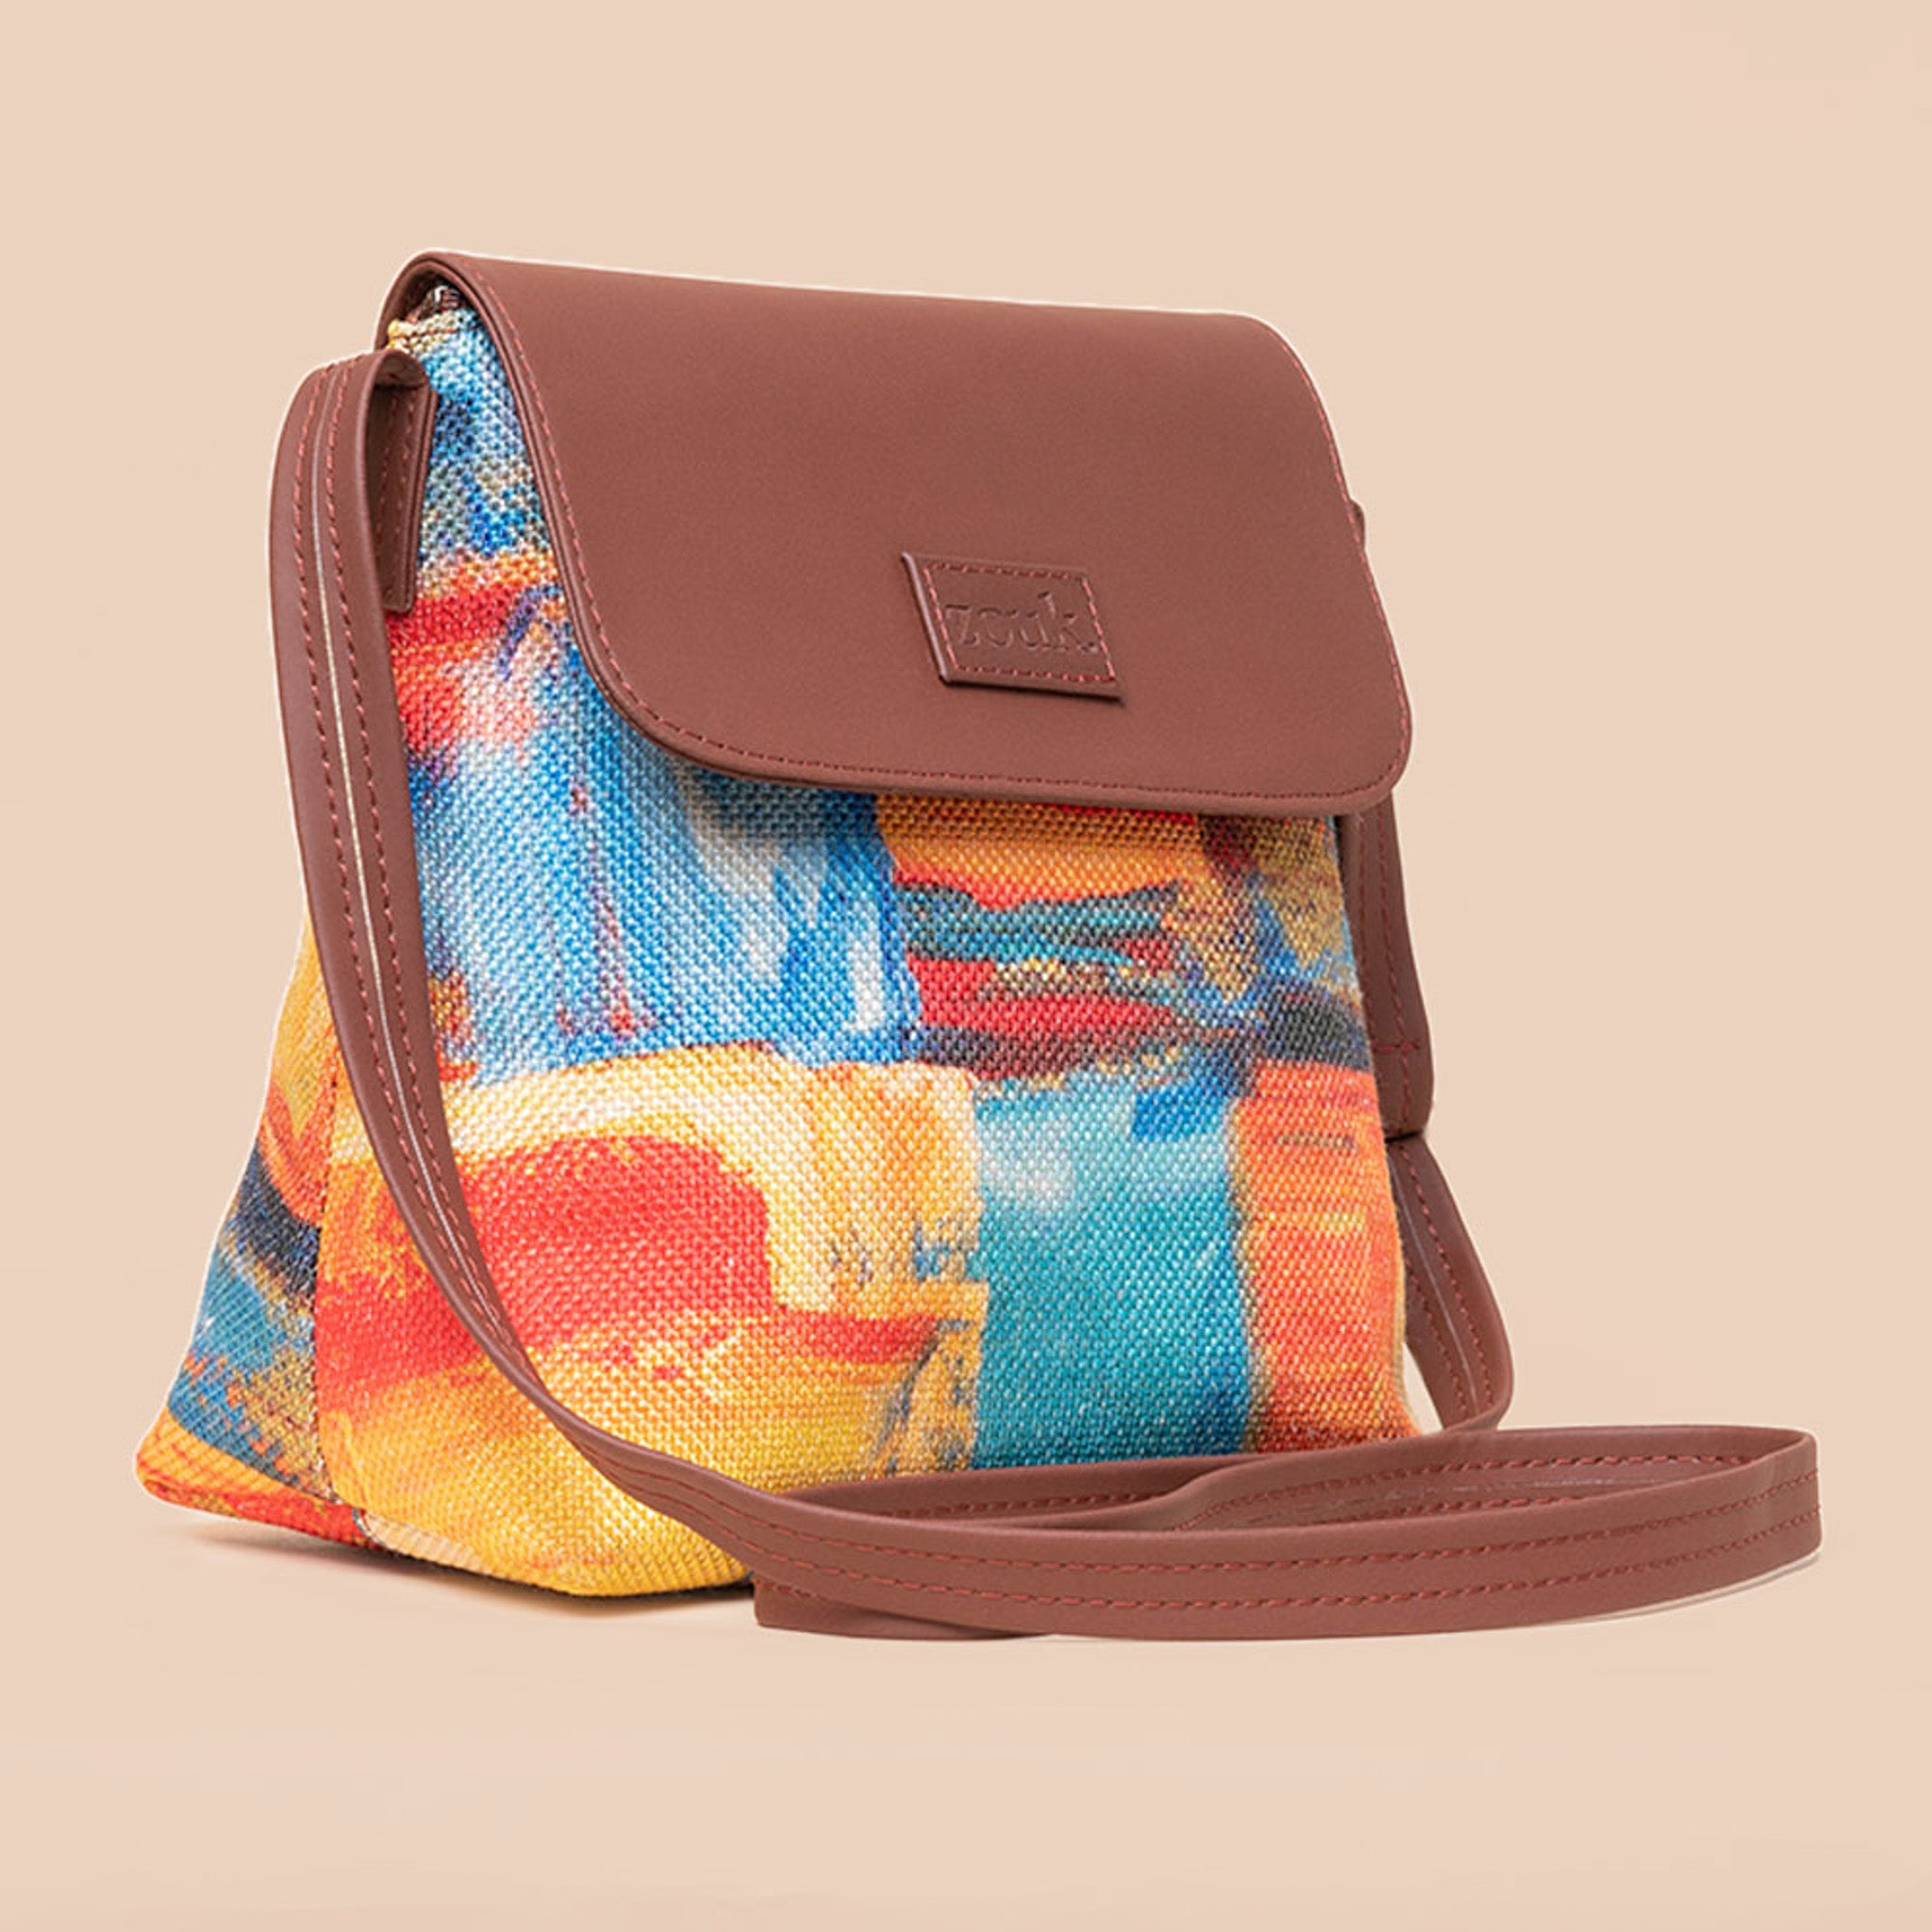 Abstract Amaze Flap Sling Bag